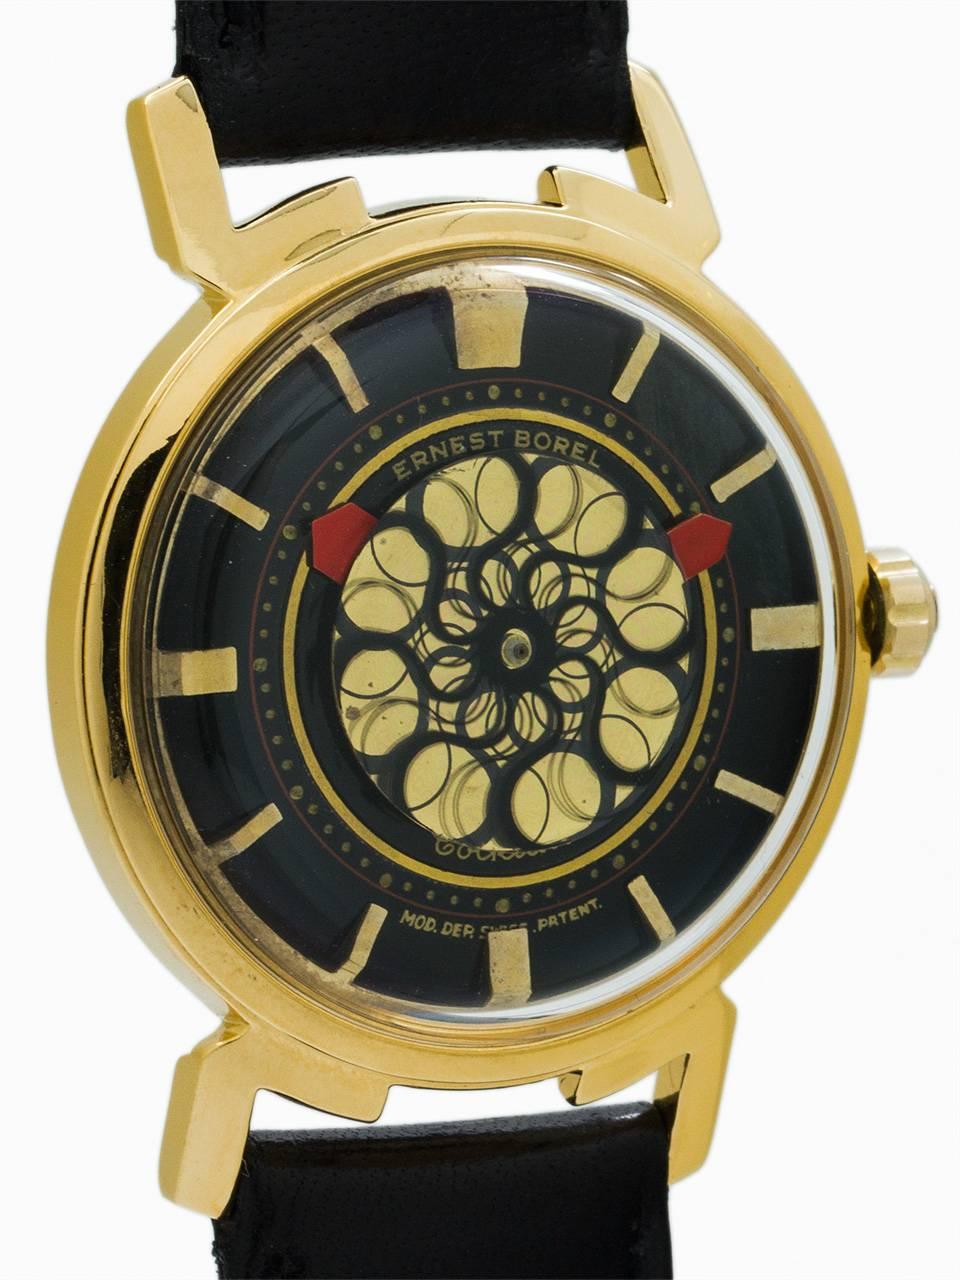 Retro Borel Yellow Gold Stainless Steel Manual Wind Cocktail Wristwatch circa 1960s